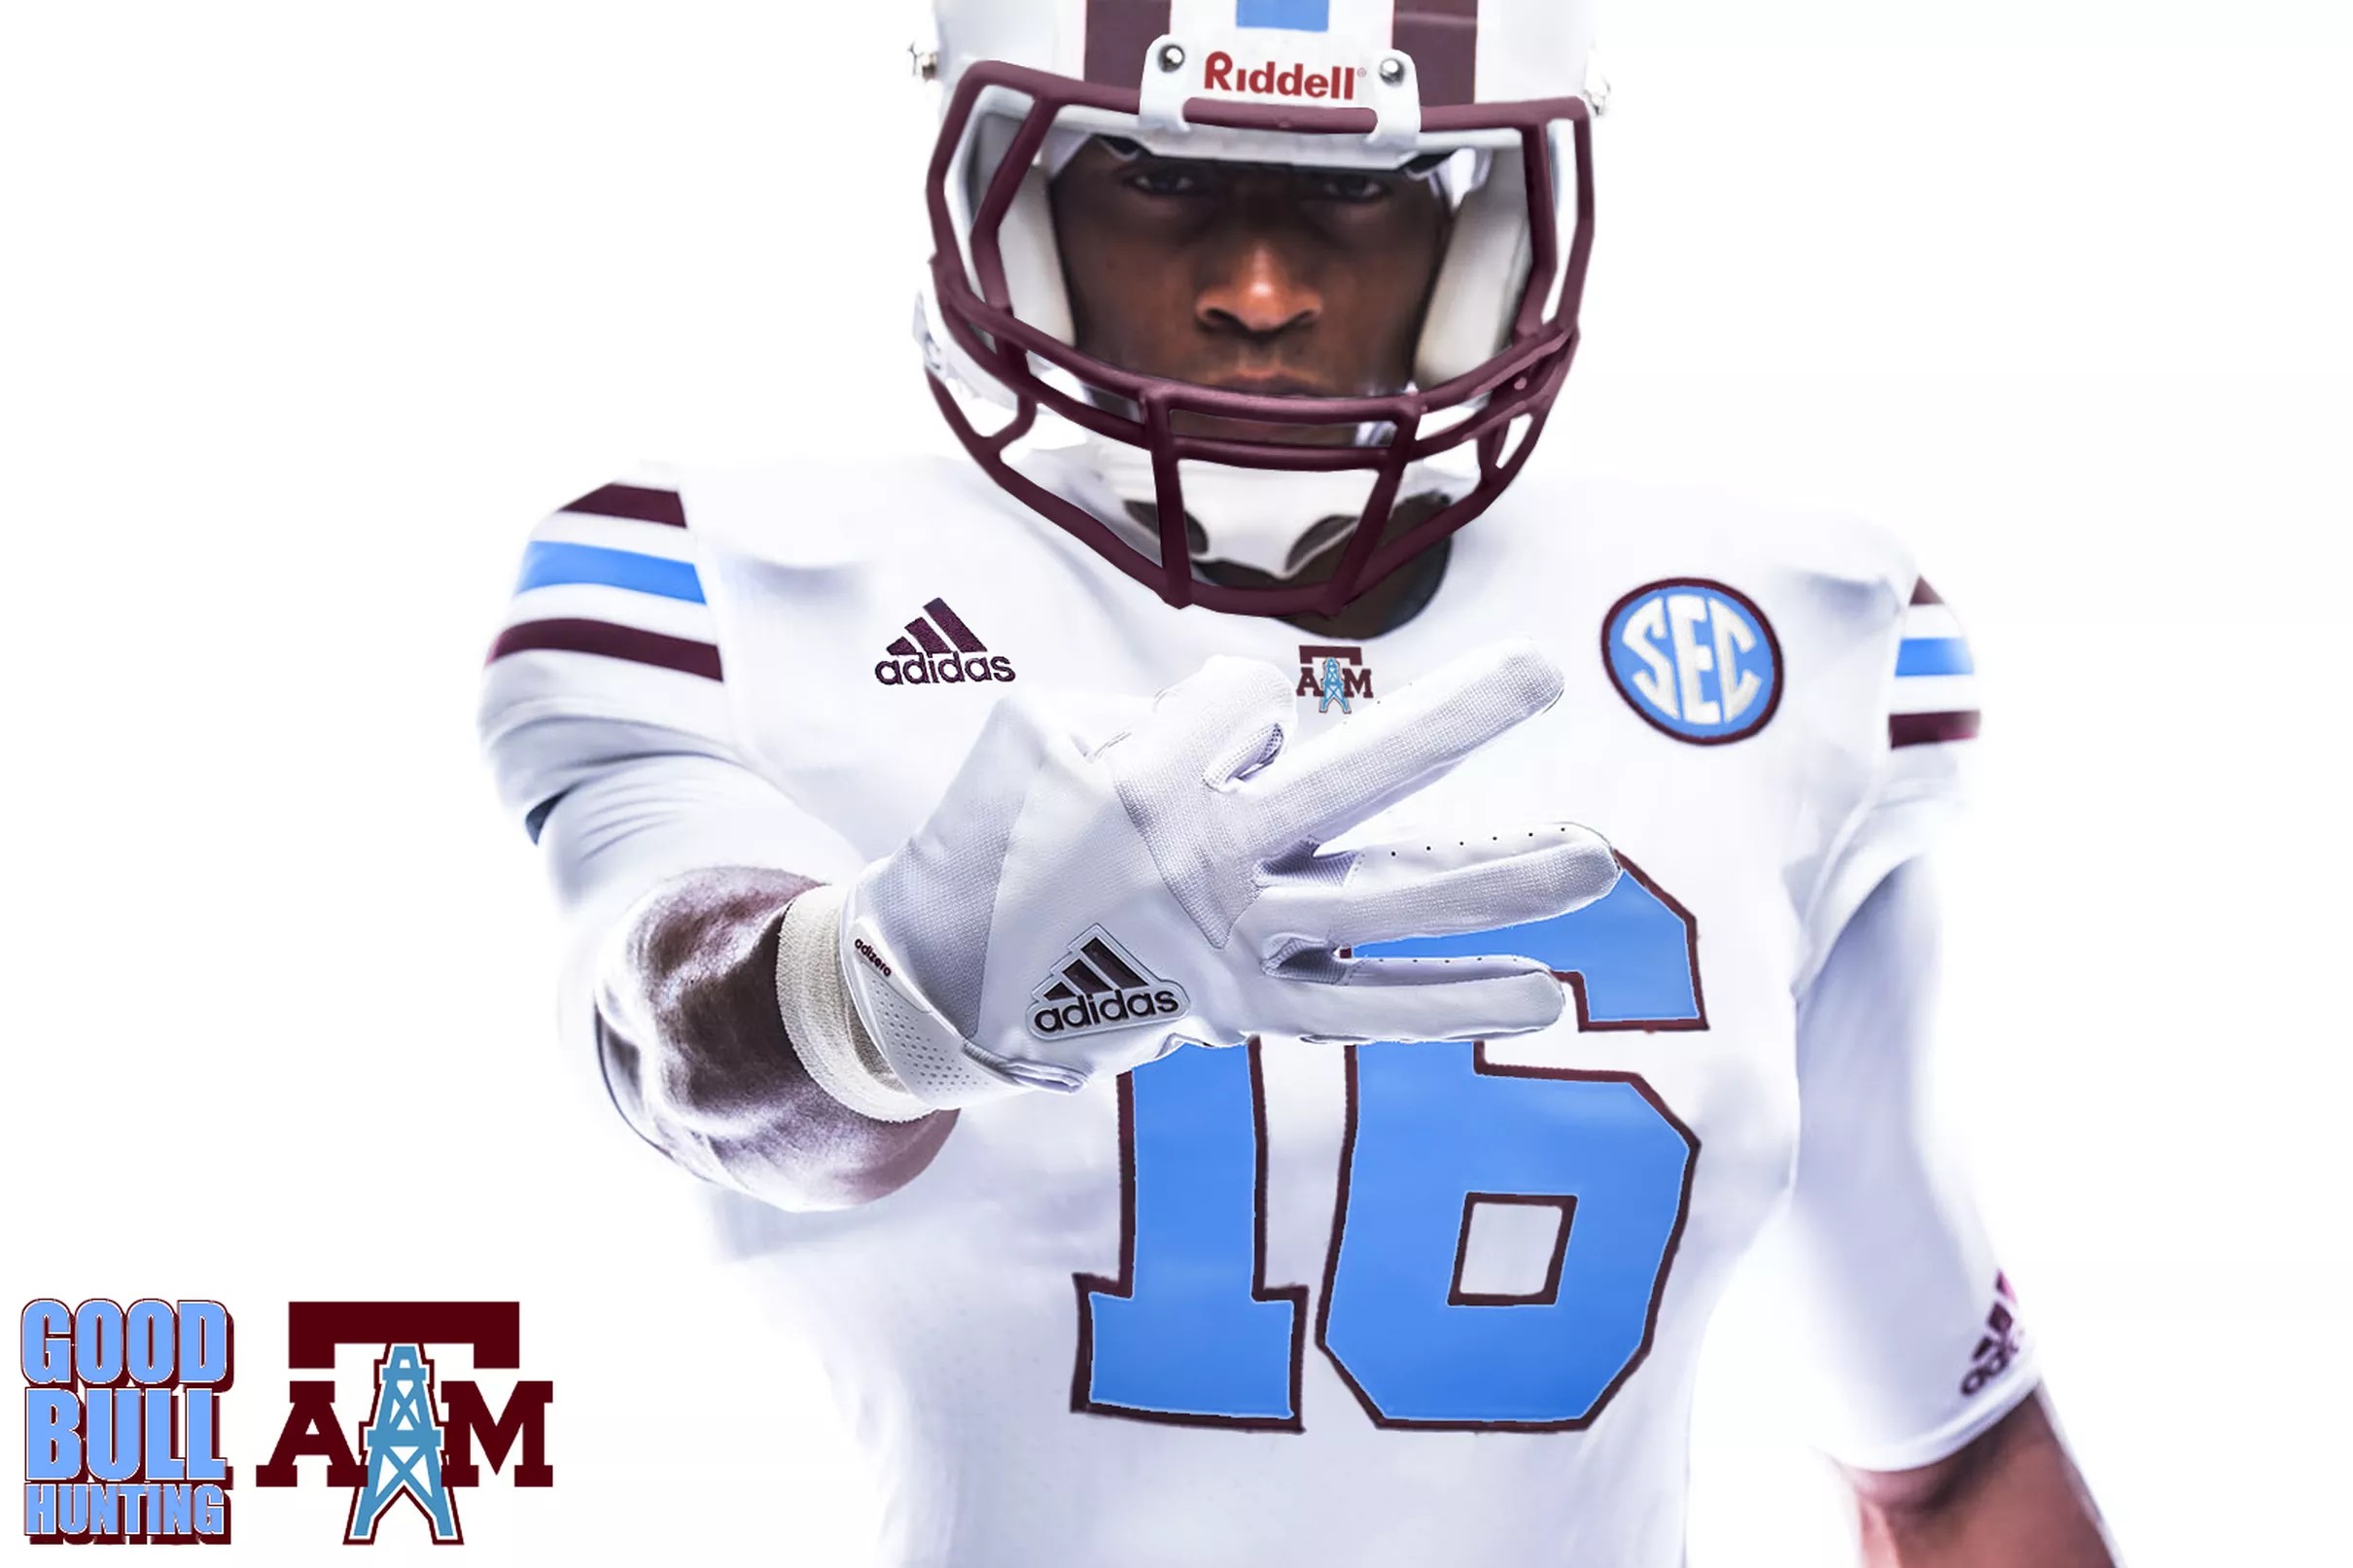 Texas A&M to wear Houston Oilers tribute uniforms in response to